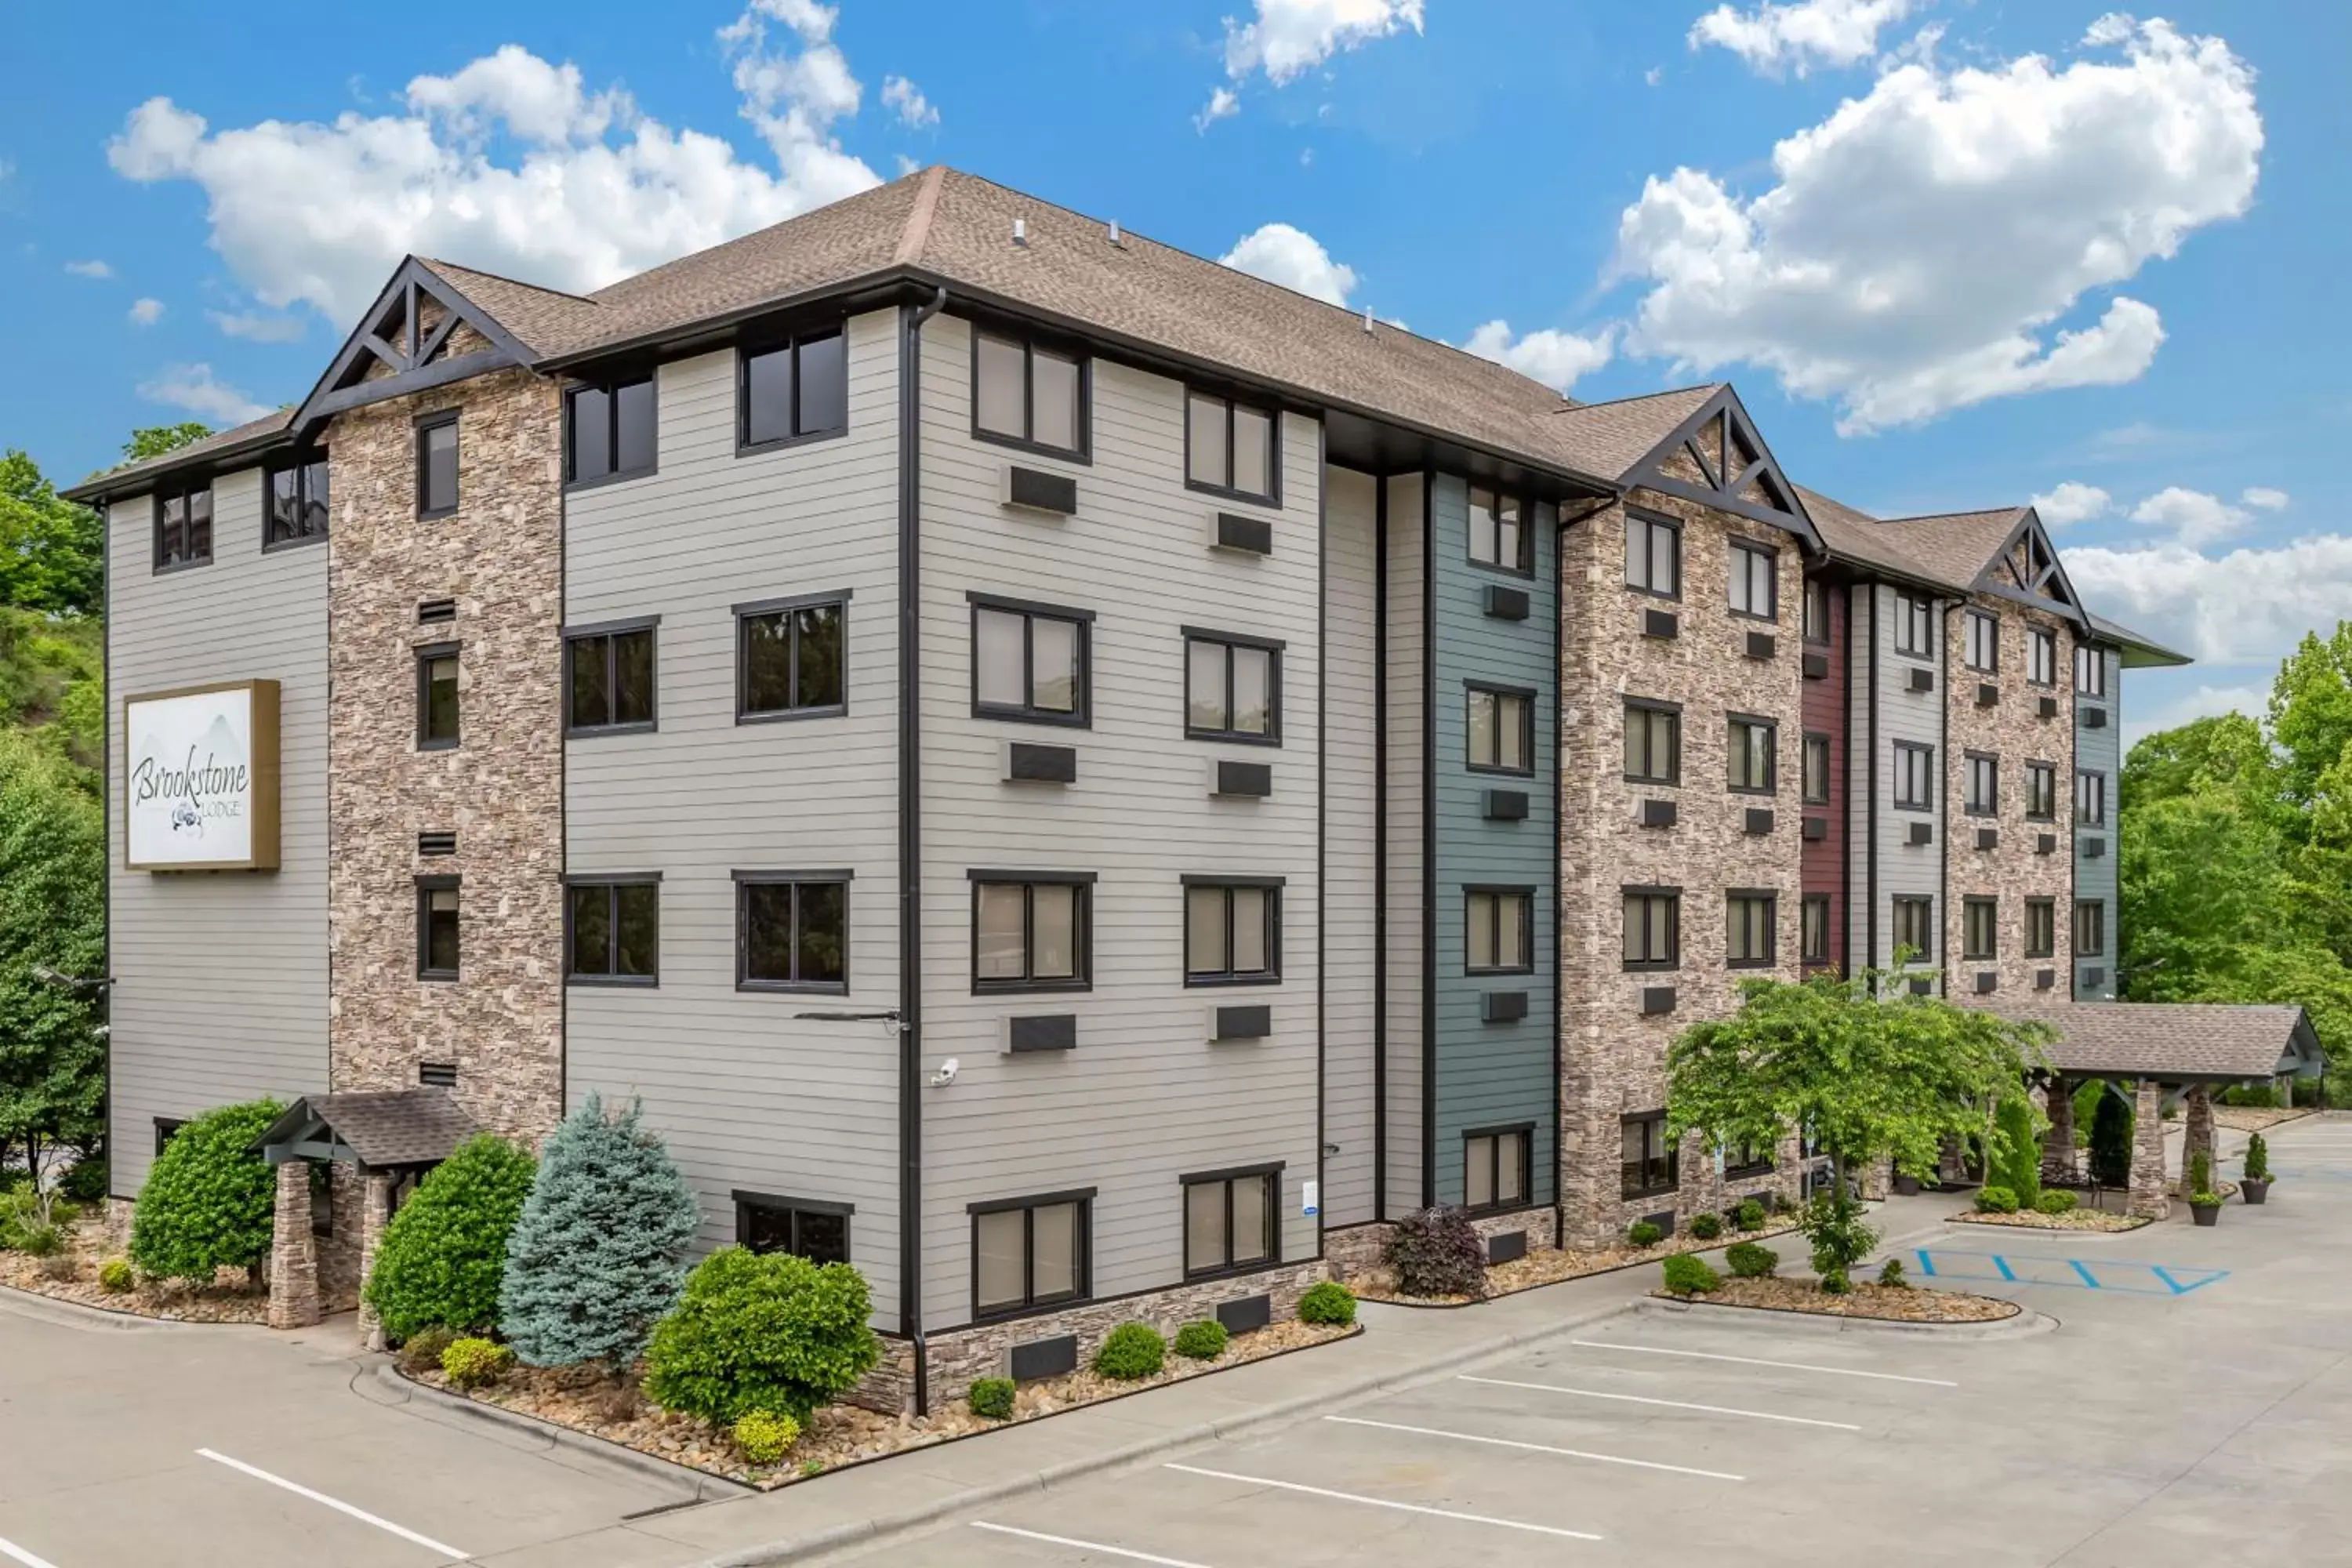 Property Building in Brookstone Lodge near Biltmore Village, Ascend Hotel Collection